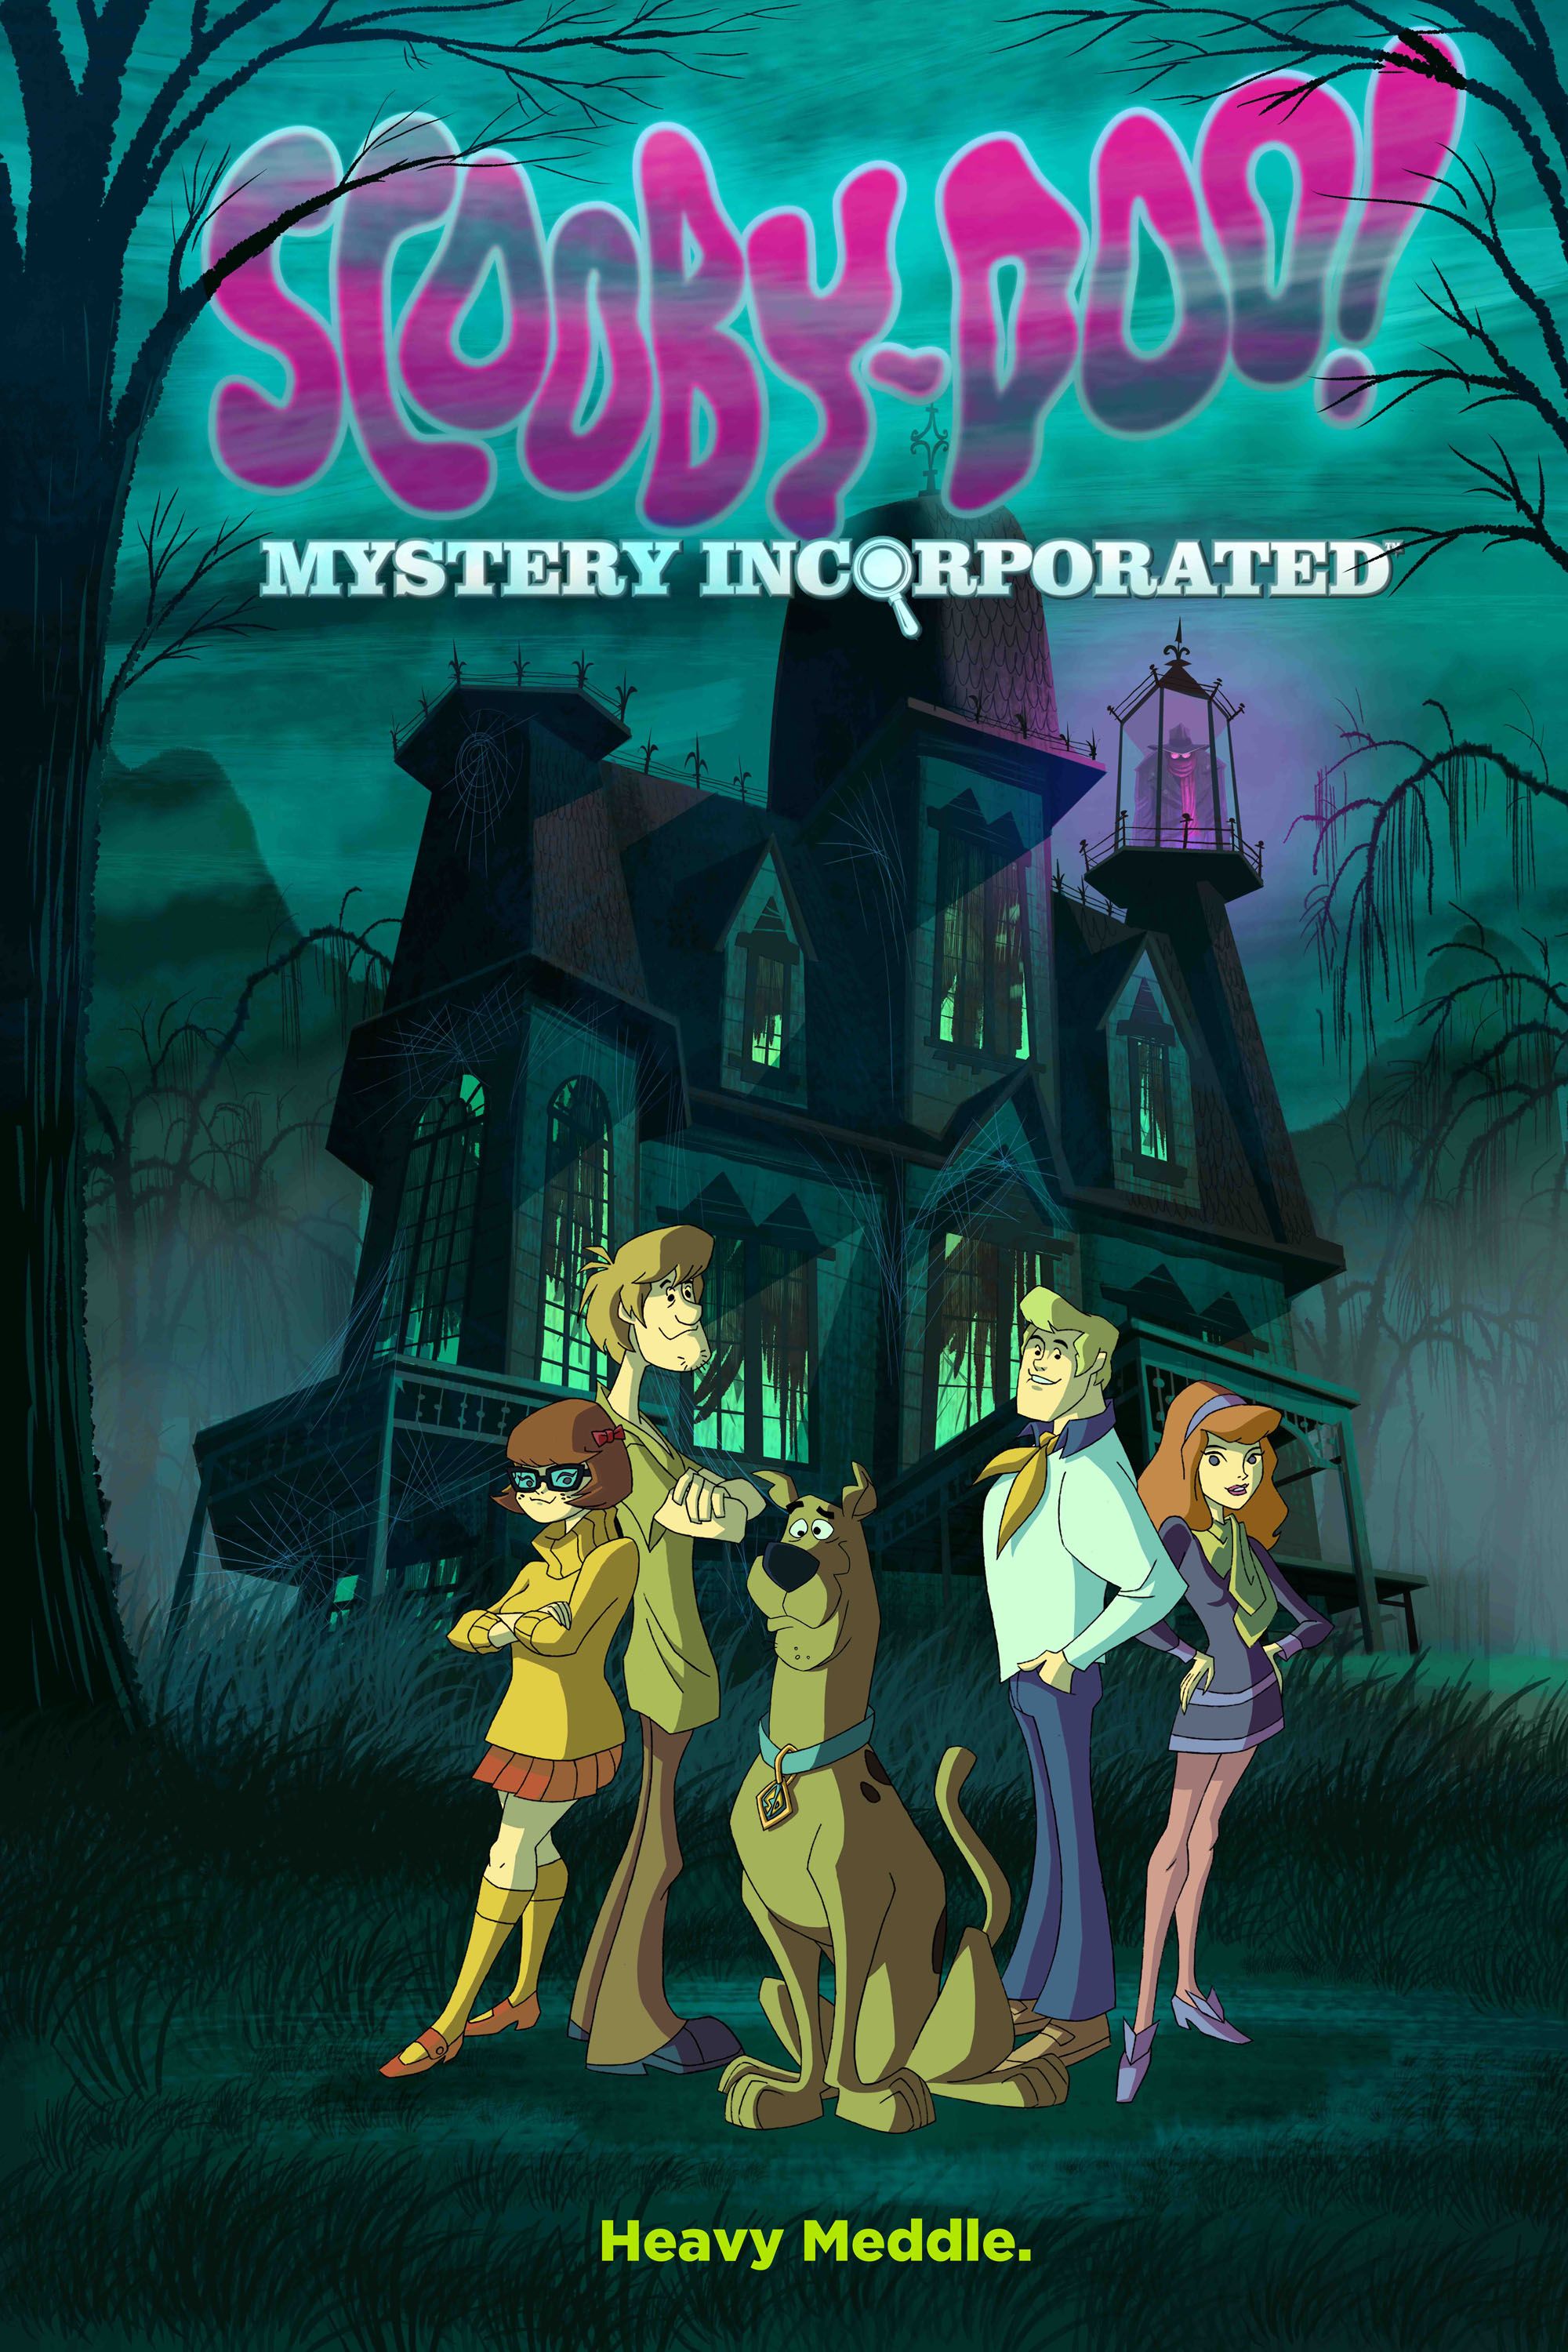 Scooby Doo Mystery Incorporated Wallpapers Pack, By Scooby Doo